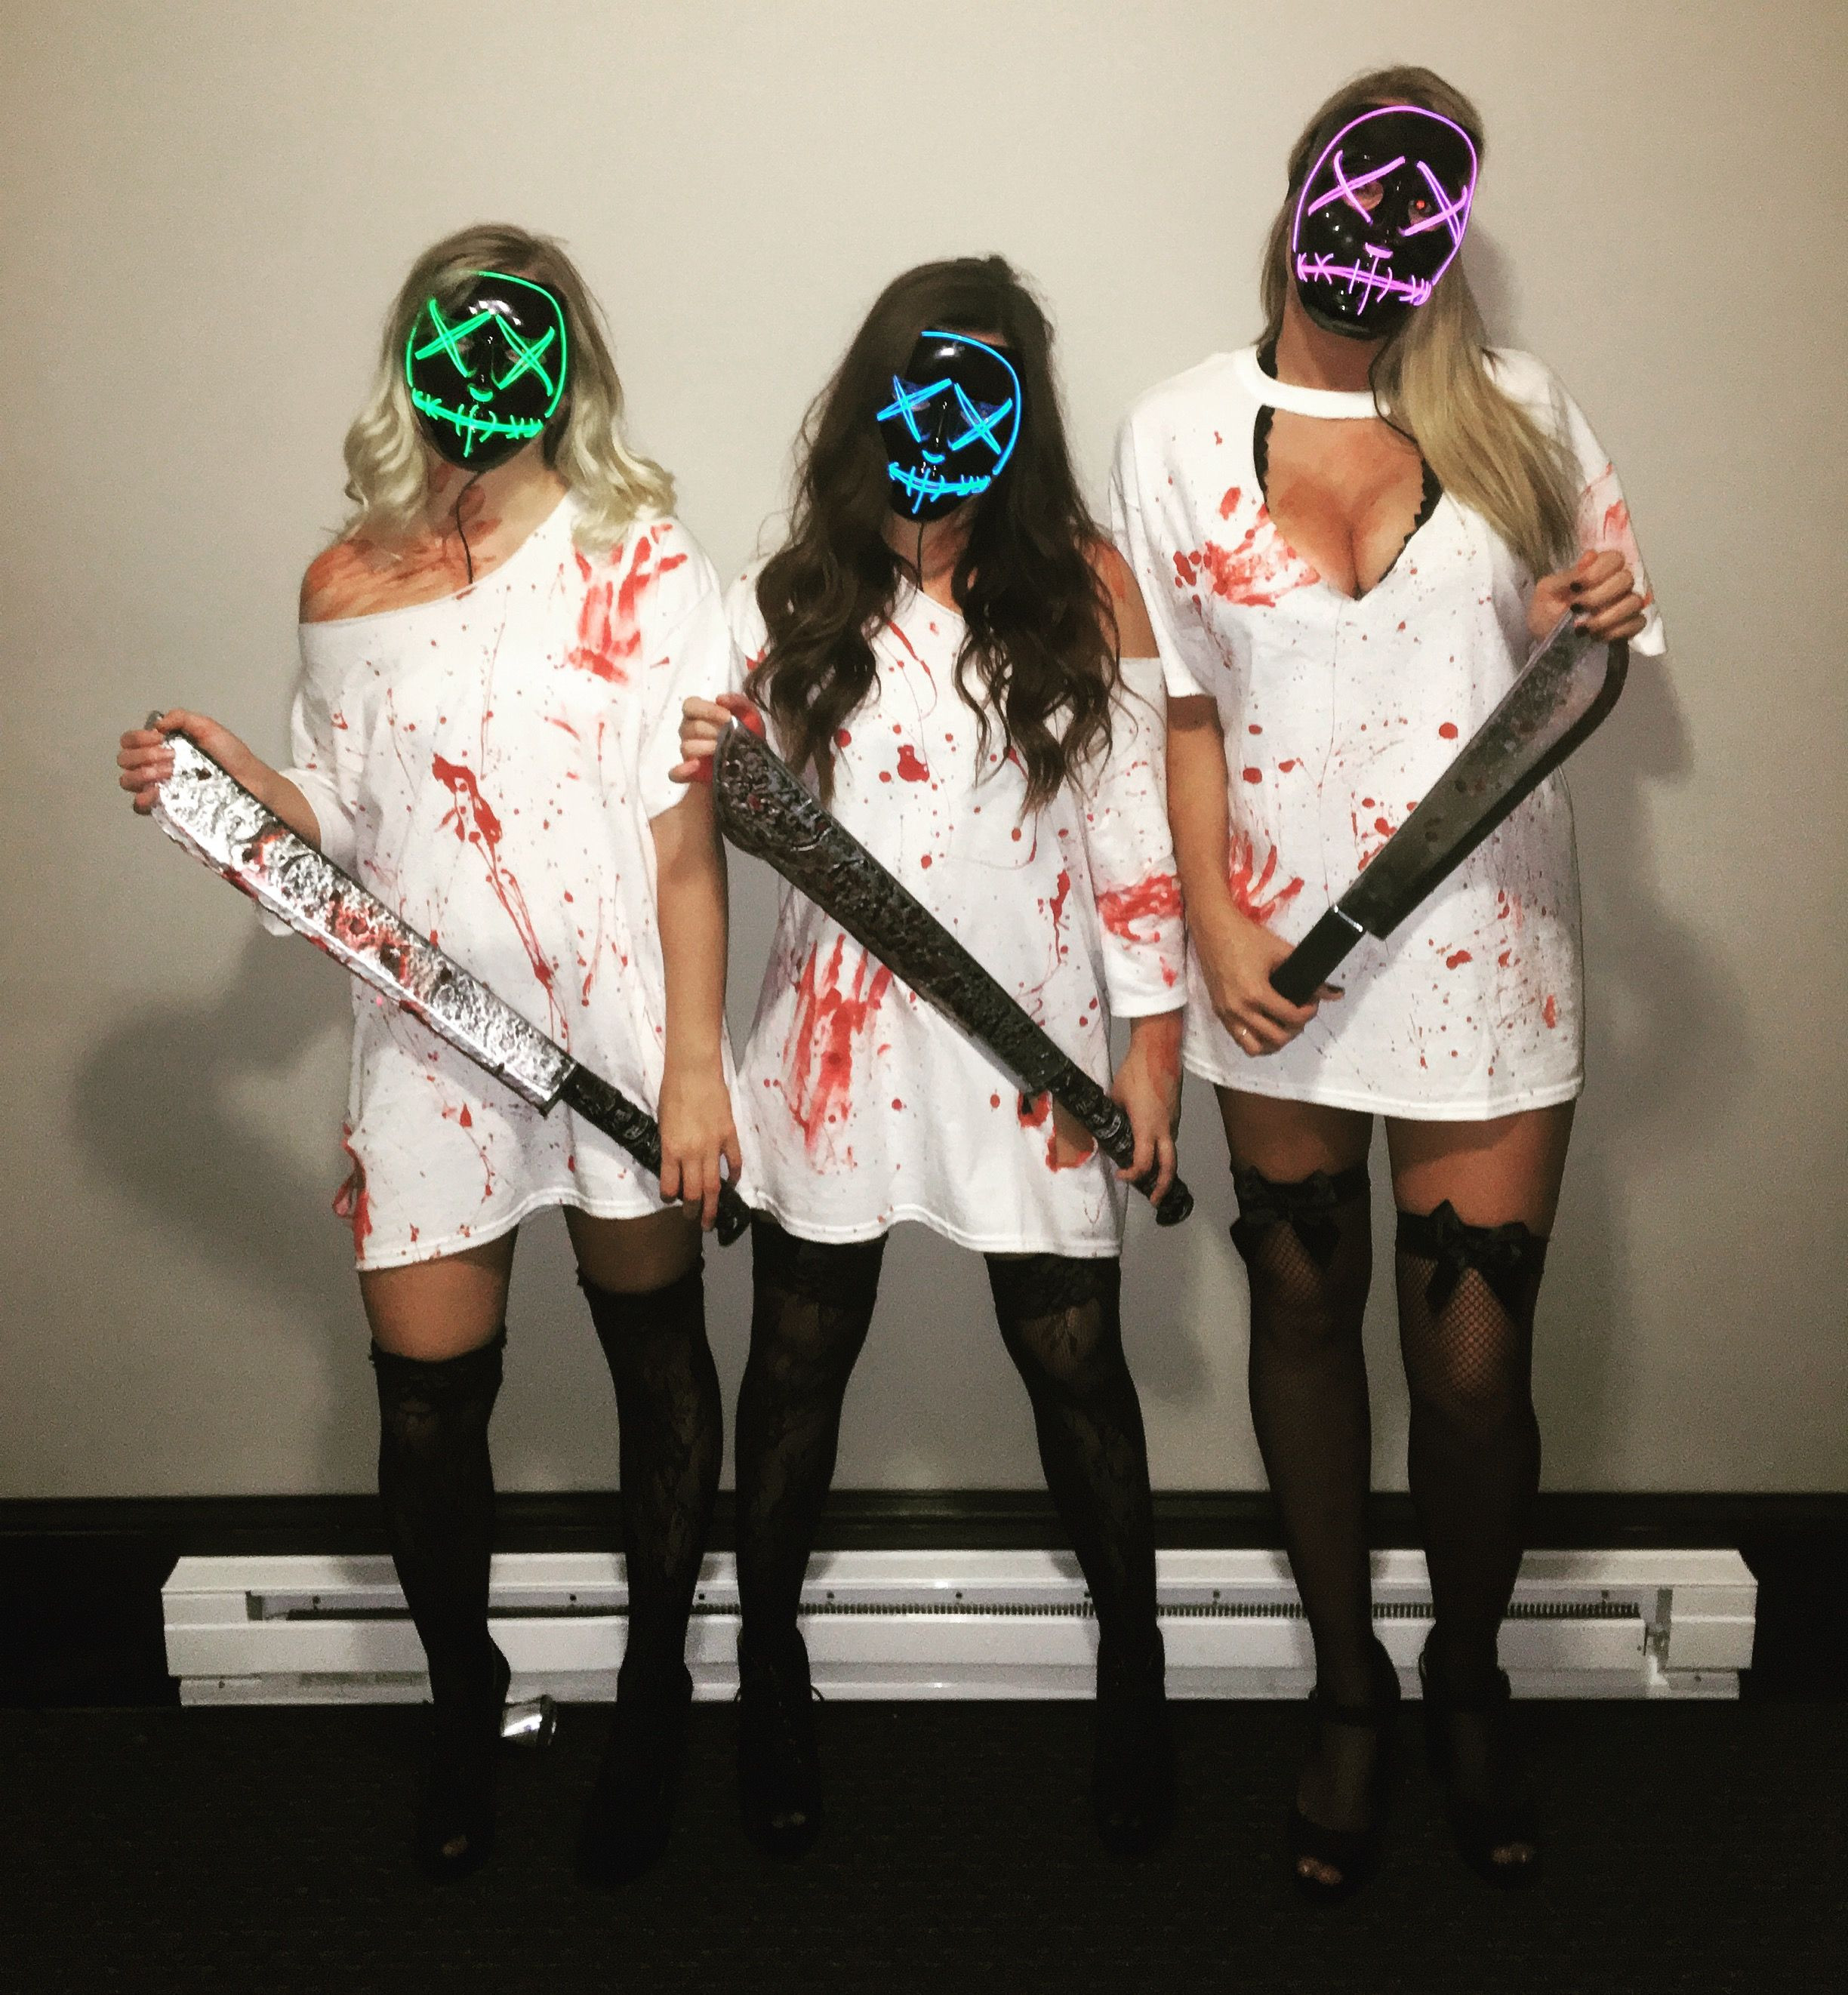 Top 20 Purge Costume Diy - Best Collections Ever Home Decor DIY Crafts Colo...